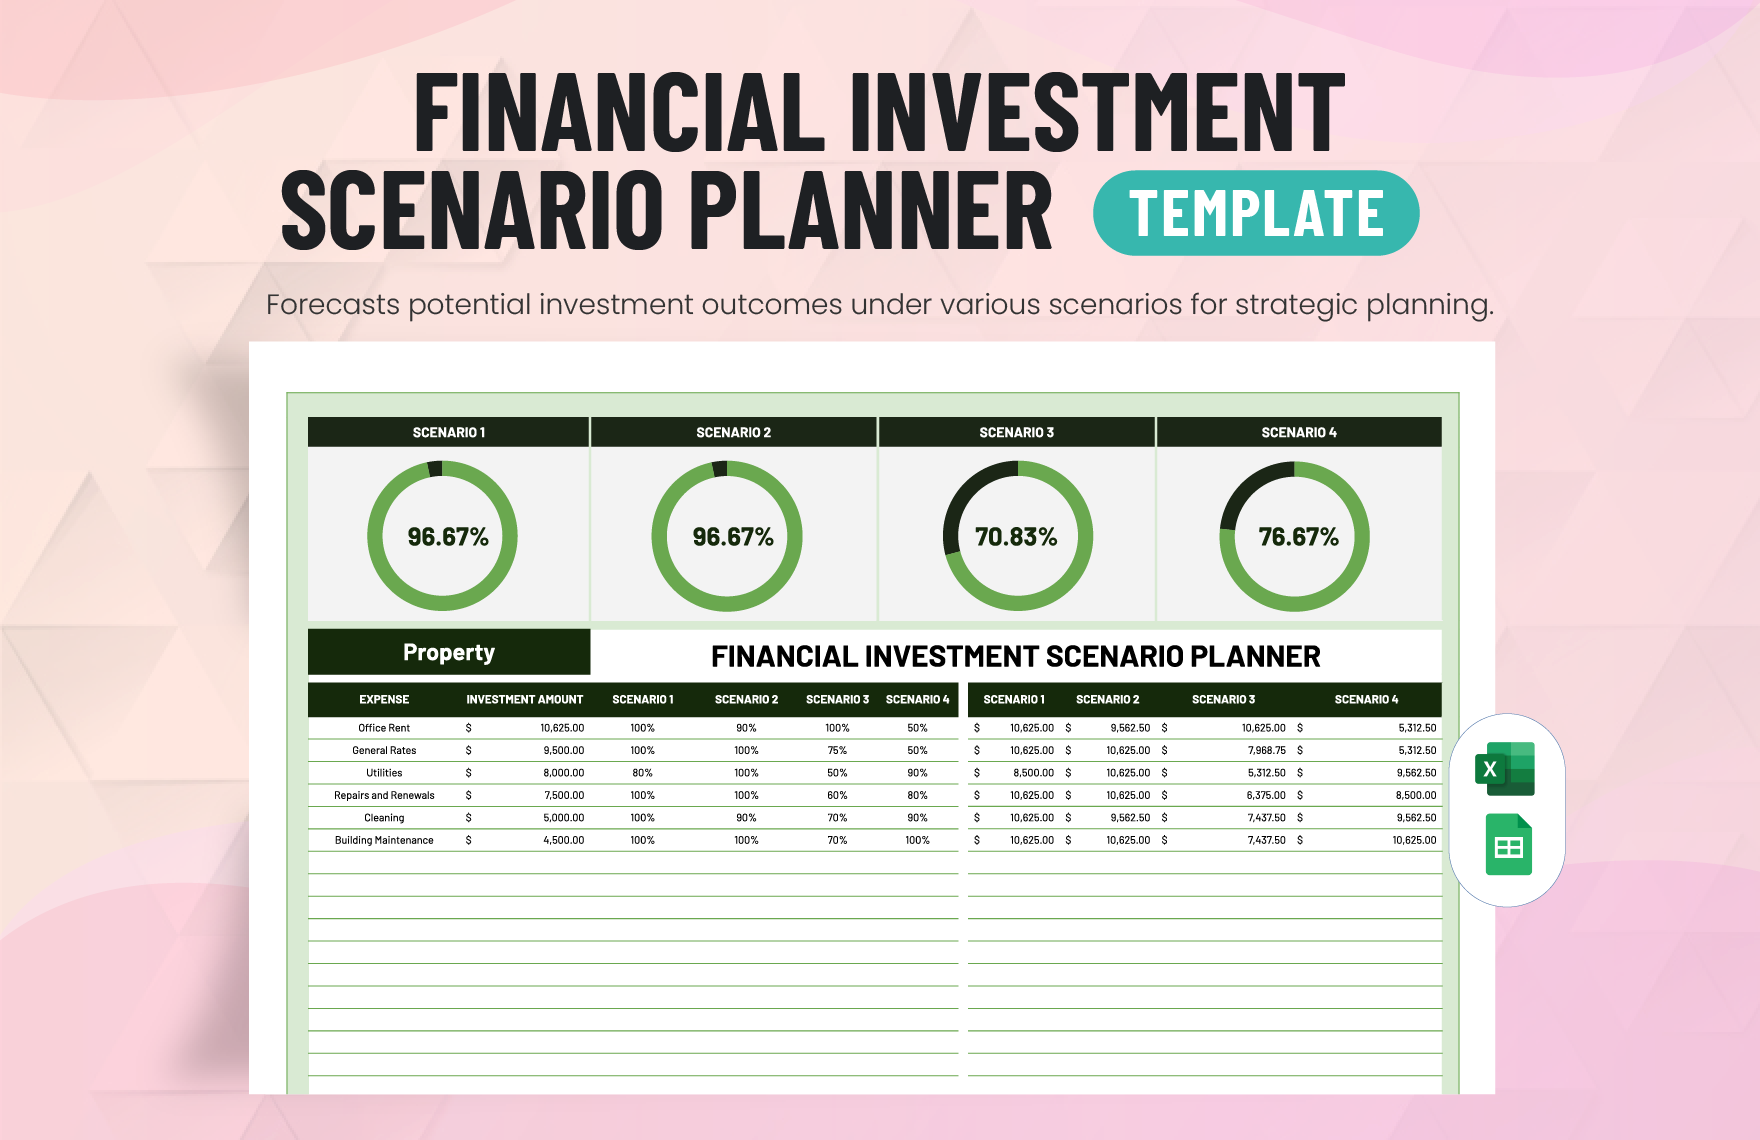 Financial Investment Scenario Planner Template in Excel, Google Sheets